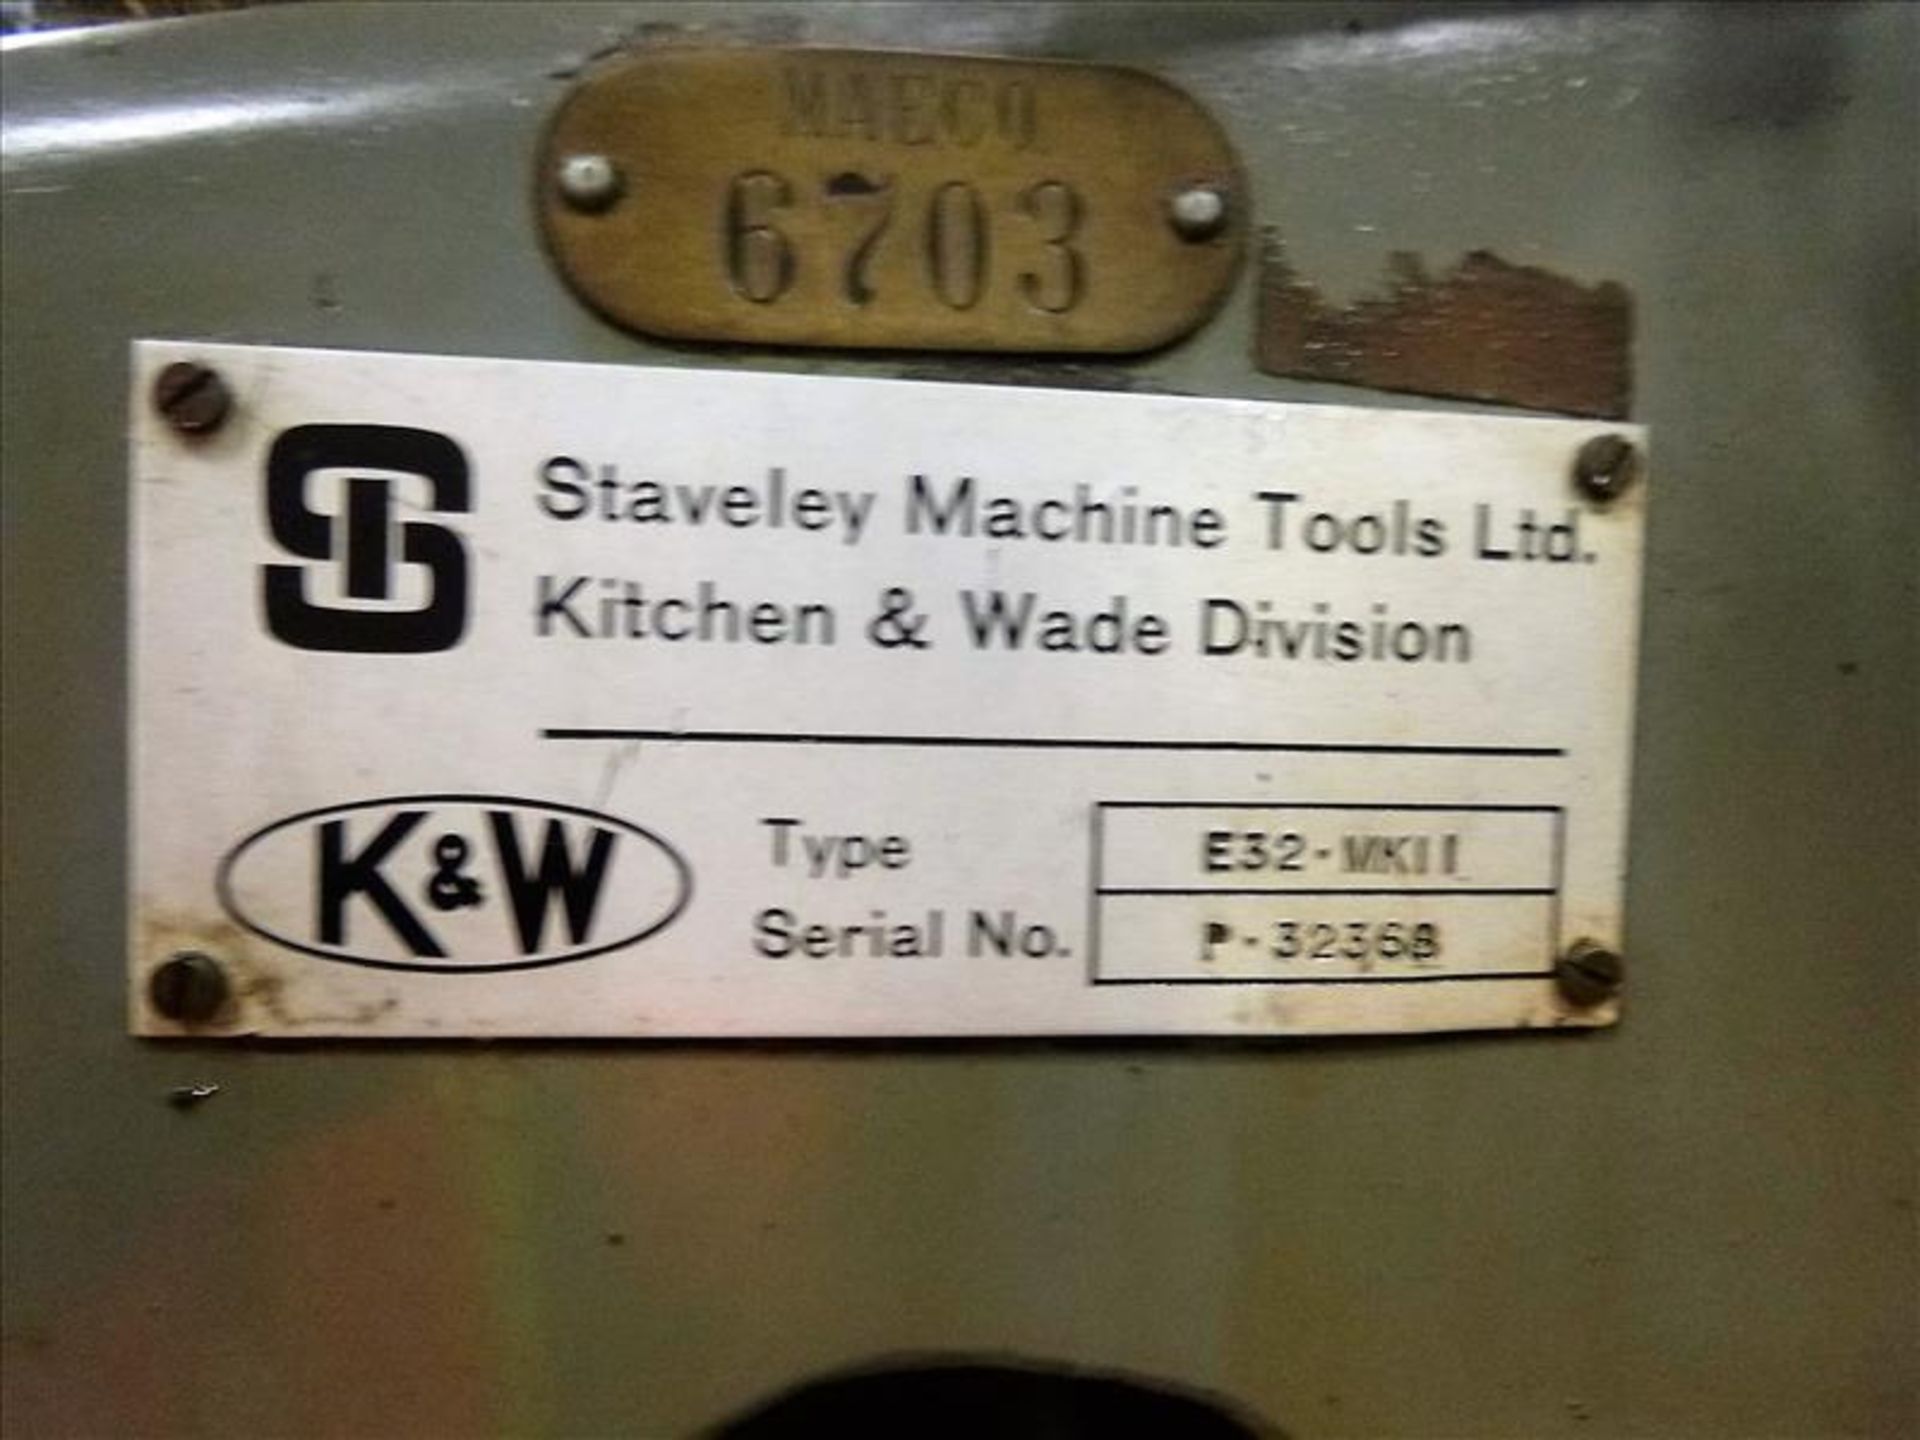 KITCHEN & WADE E32 MARK II 12/54 Radial Arm Drill - Image 5 of 6